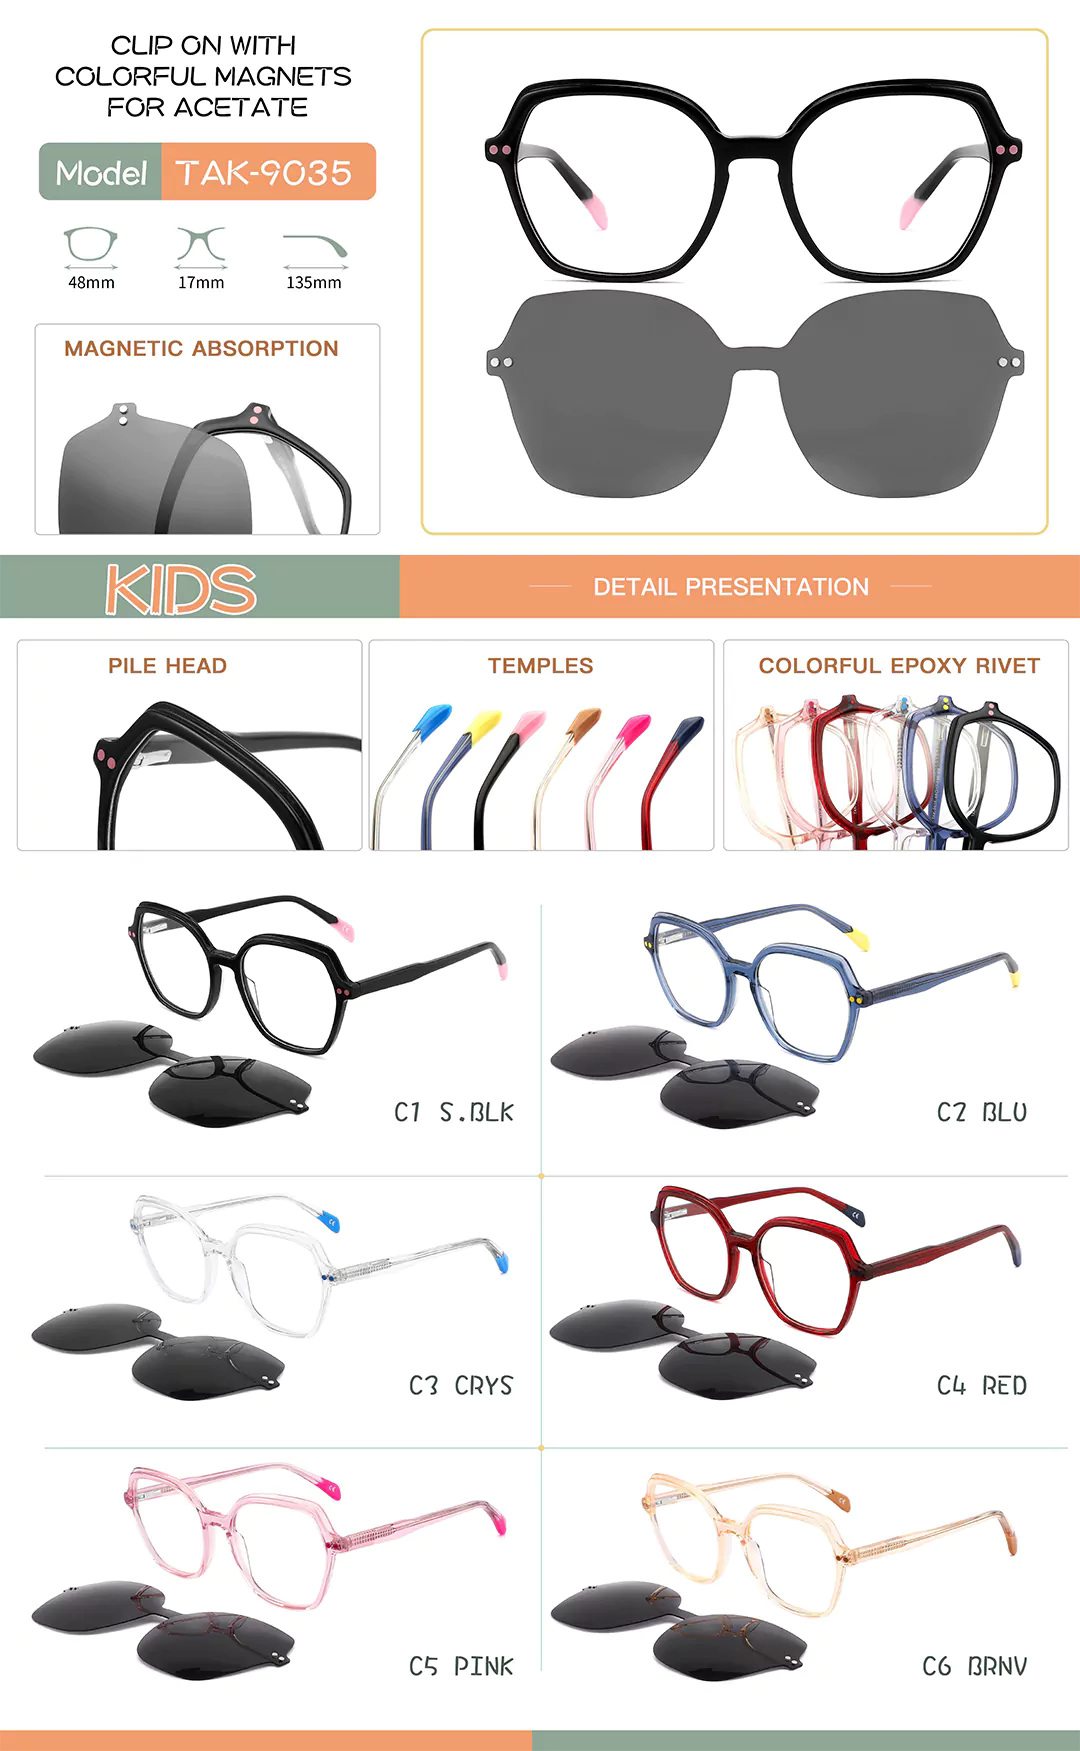 Children's clip-on set of eyeglasses TAK9035 in different colors show and detail shot